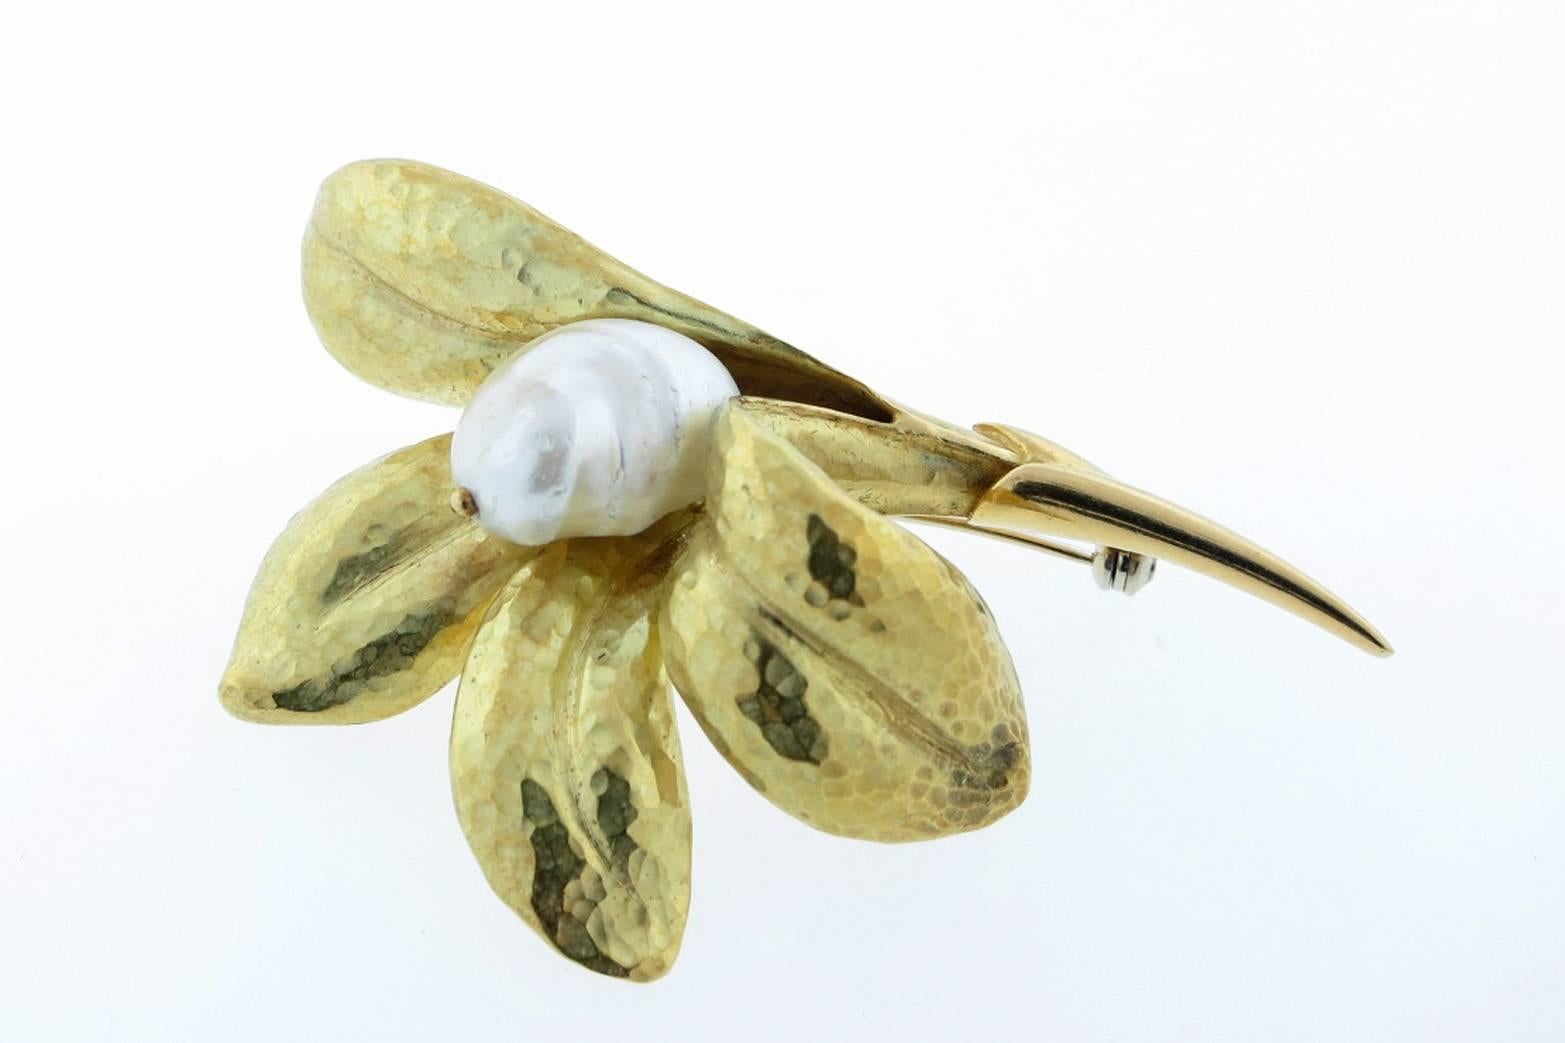 Lovely 18 kt yellow gold hammered finish flower brooch. The center is set with a lustrous baroque south sea pearl measuring approx 15 mm. The brooch measures 2.60 inches in length. Made in Italy. 